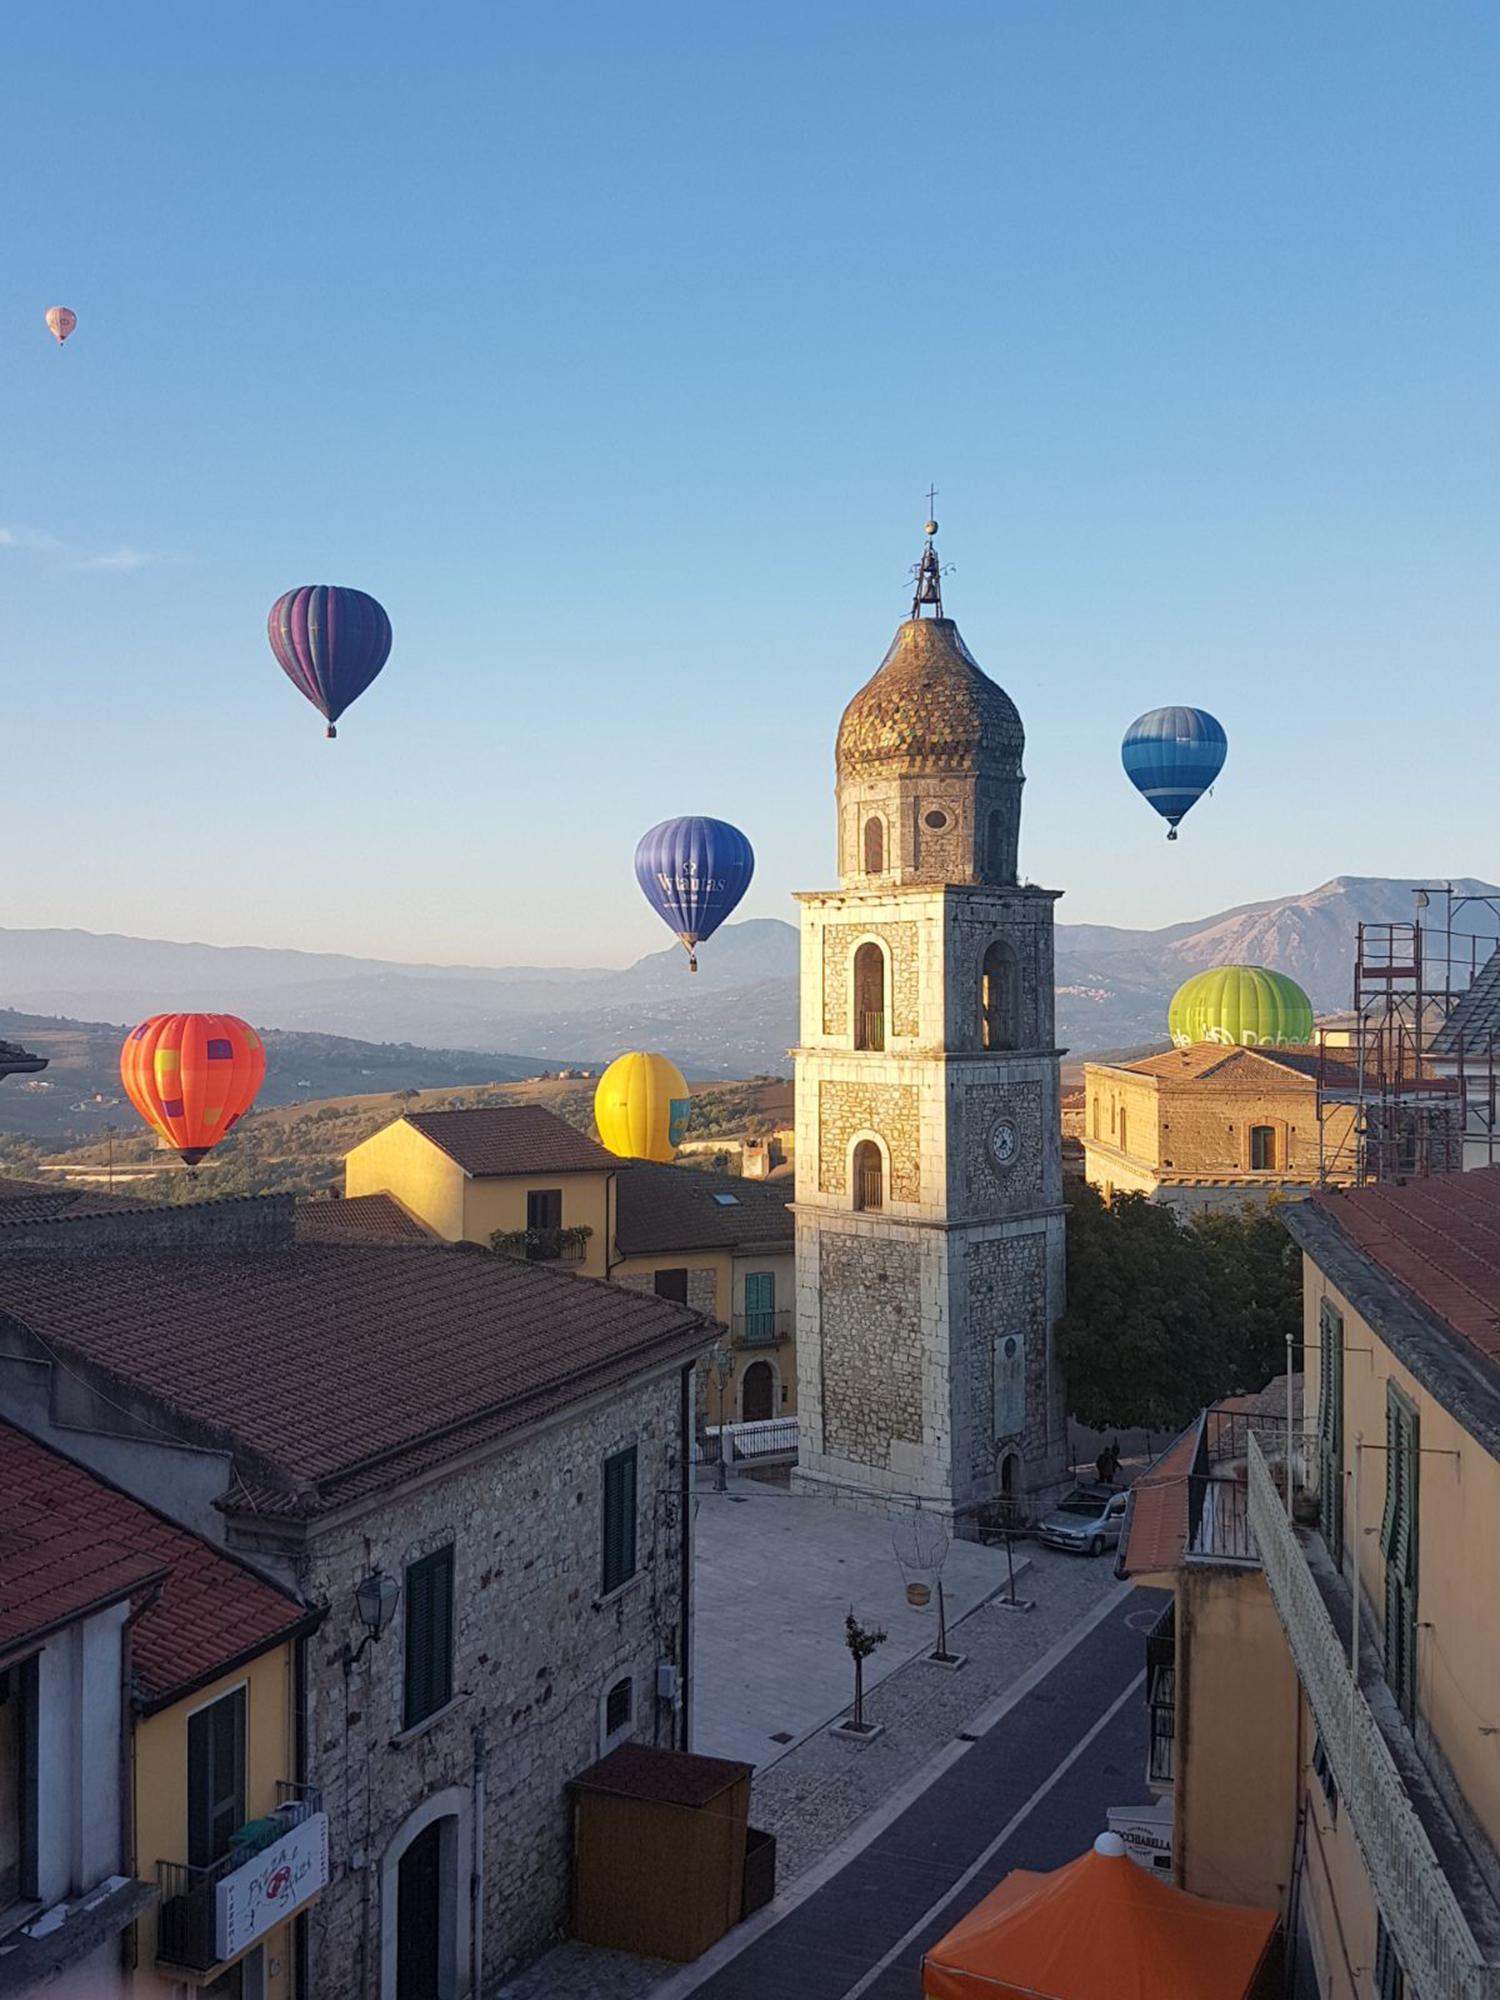 Balloons in flight over the churchyard of St. Nicholas and St. Rocco with the bell tower. – © Archivio Balooning Festival